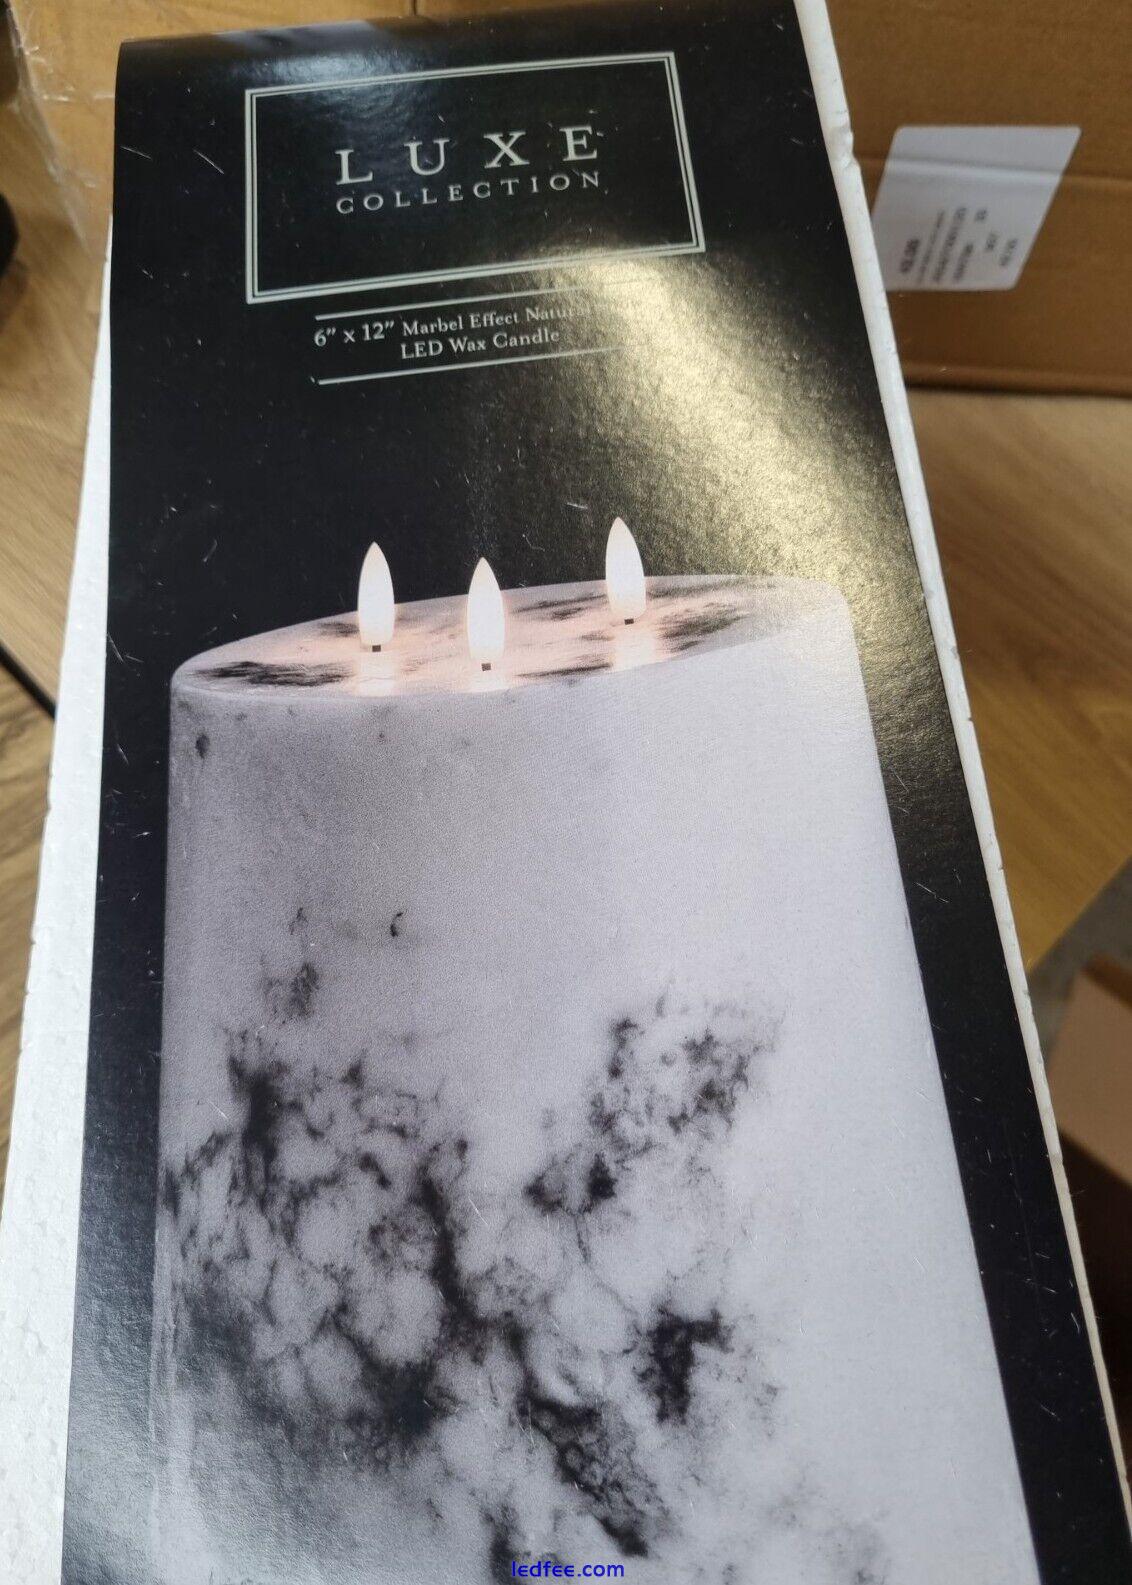 Luxe Collection Natural Glow 6 x 12 inch Marble Effect LED Candle - BNIB 5 